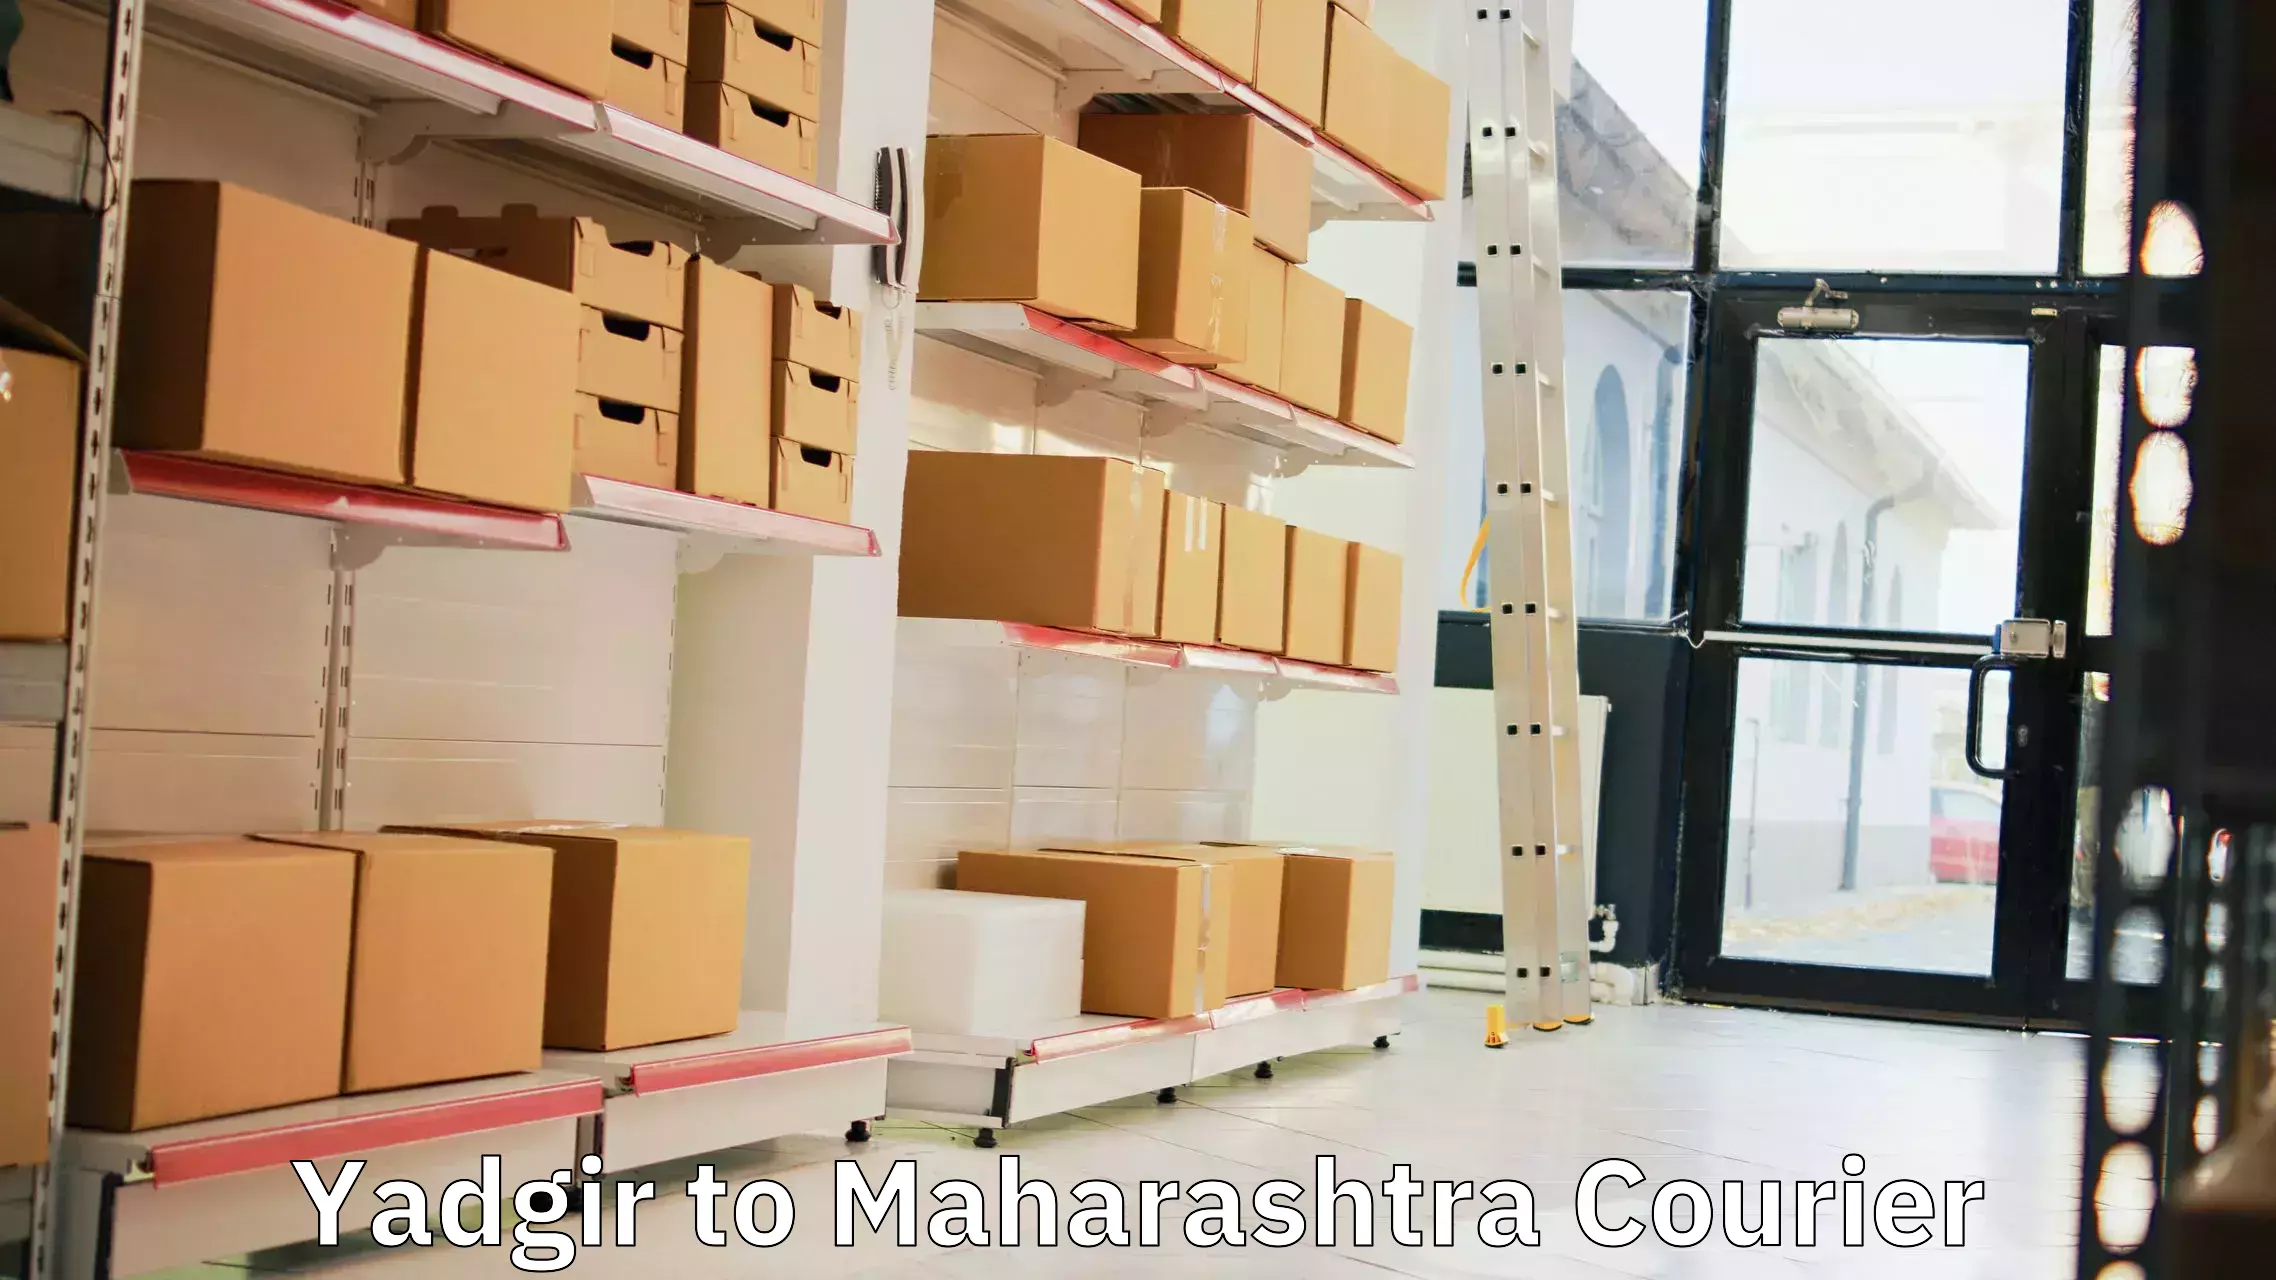 24-hour courier service in Yadgir to Nagpur